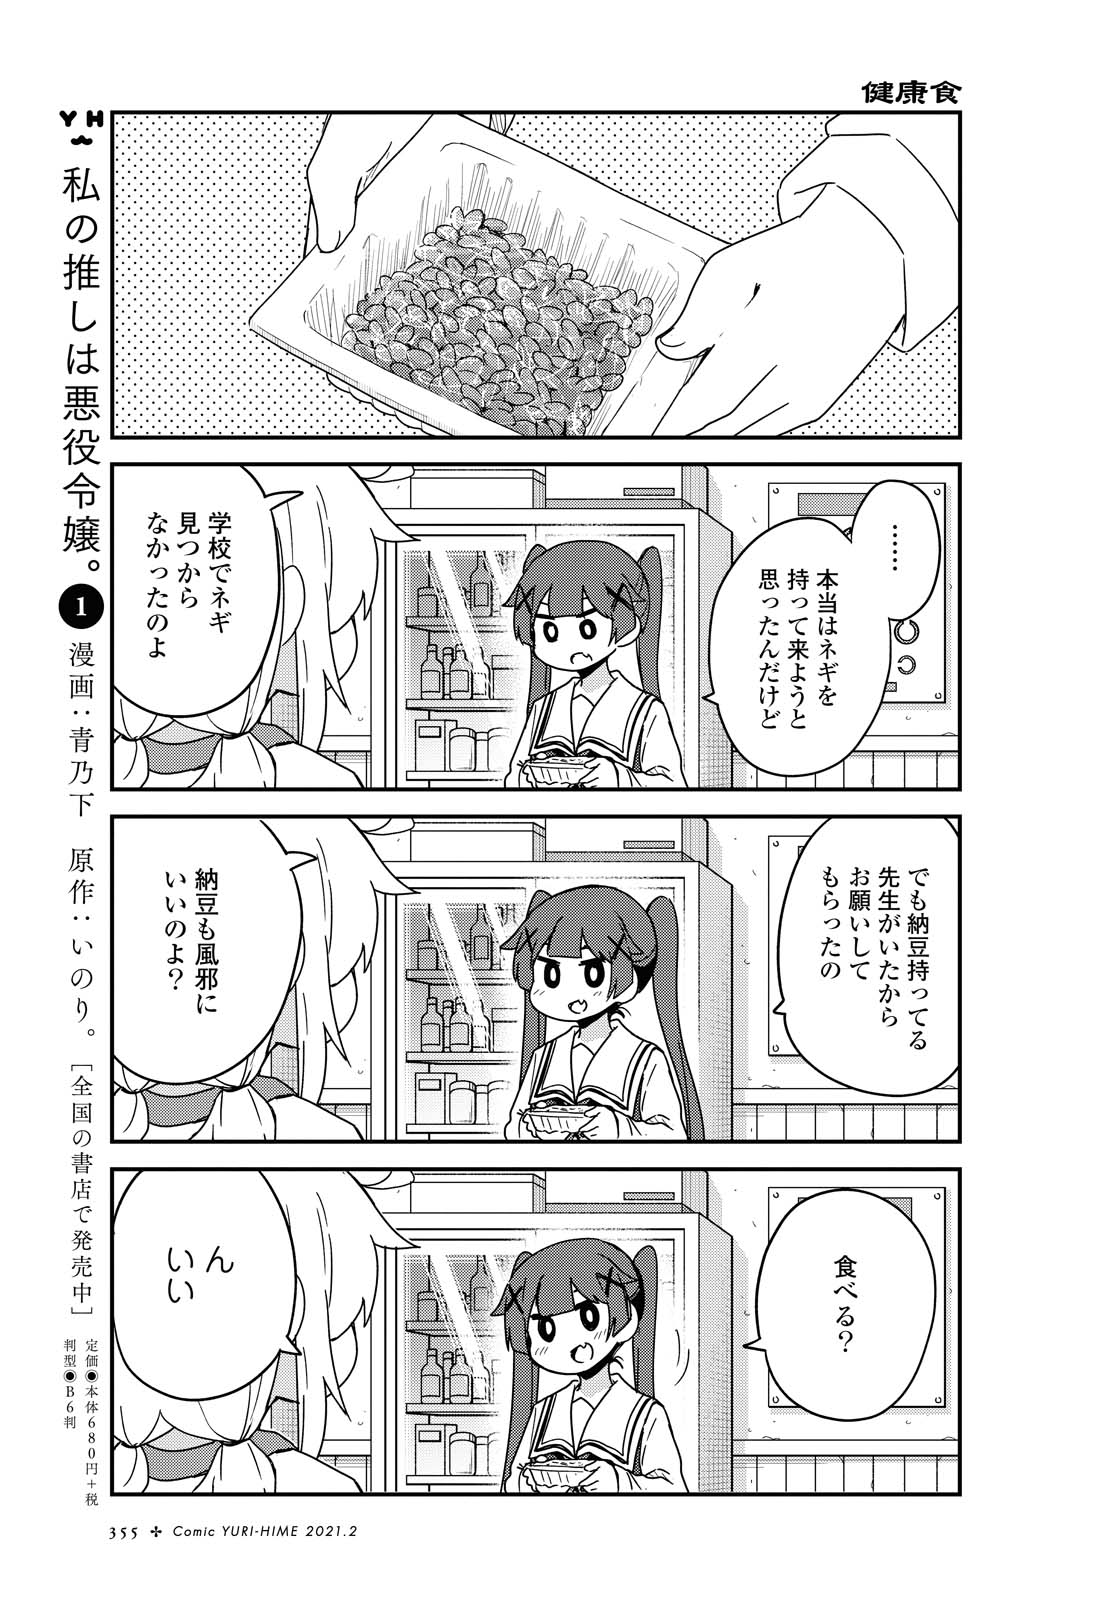 Wataten! An Angel Flew Down to Me 私に天使が舞い降りた！ 第76話 - Page 7